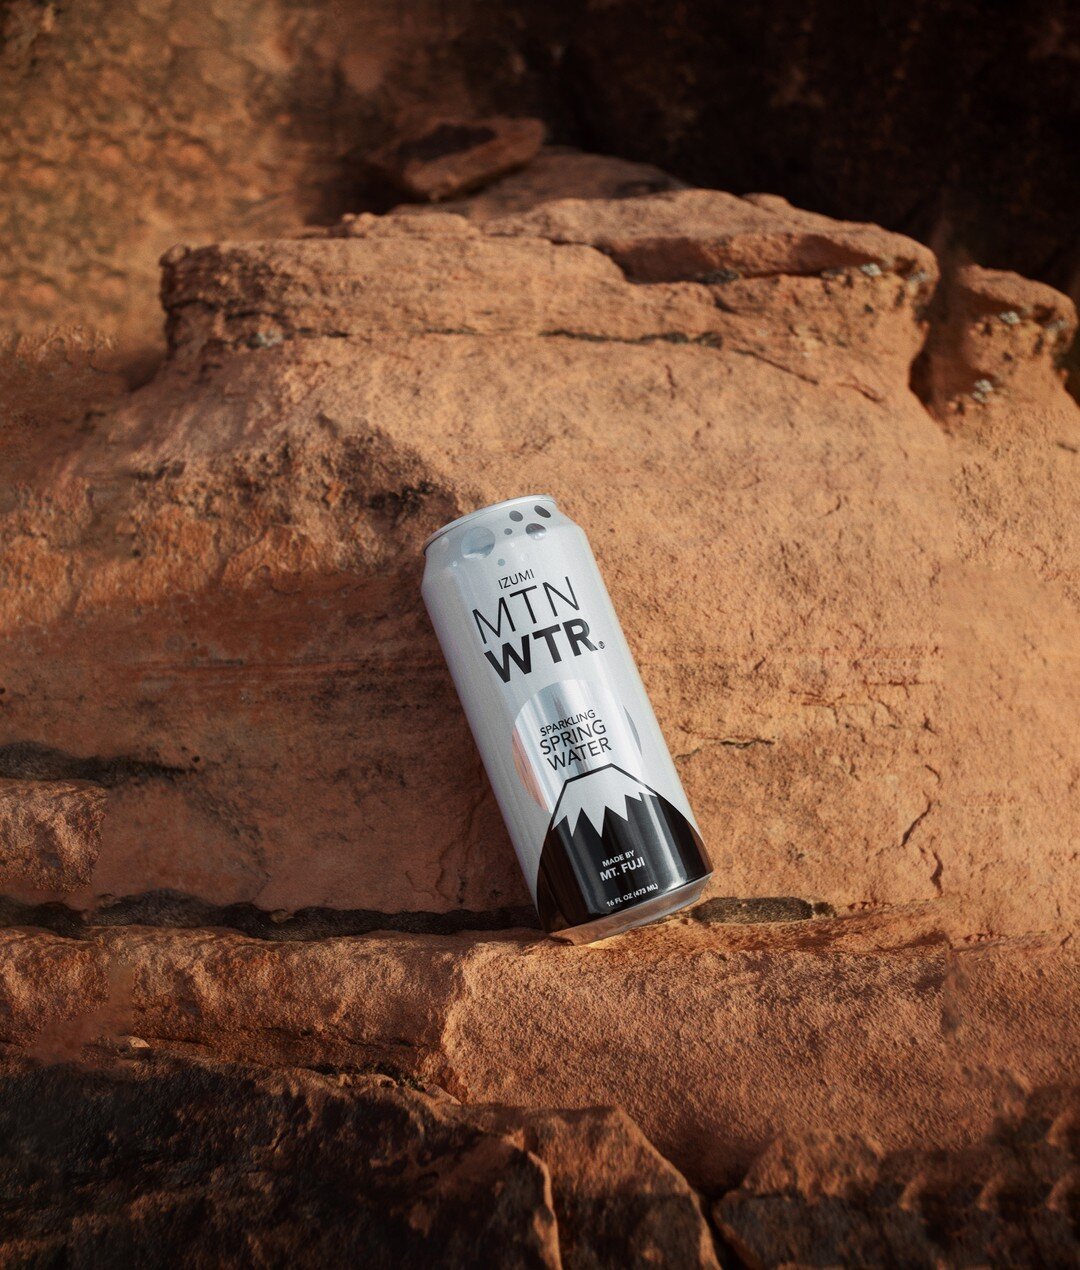 Feel the nature with MTN WTR💧​​​​​​​​​

#drinkmtnwtr #nature
#springwater #selfcare #fromjapan